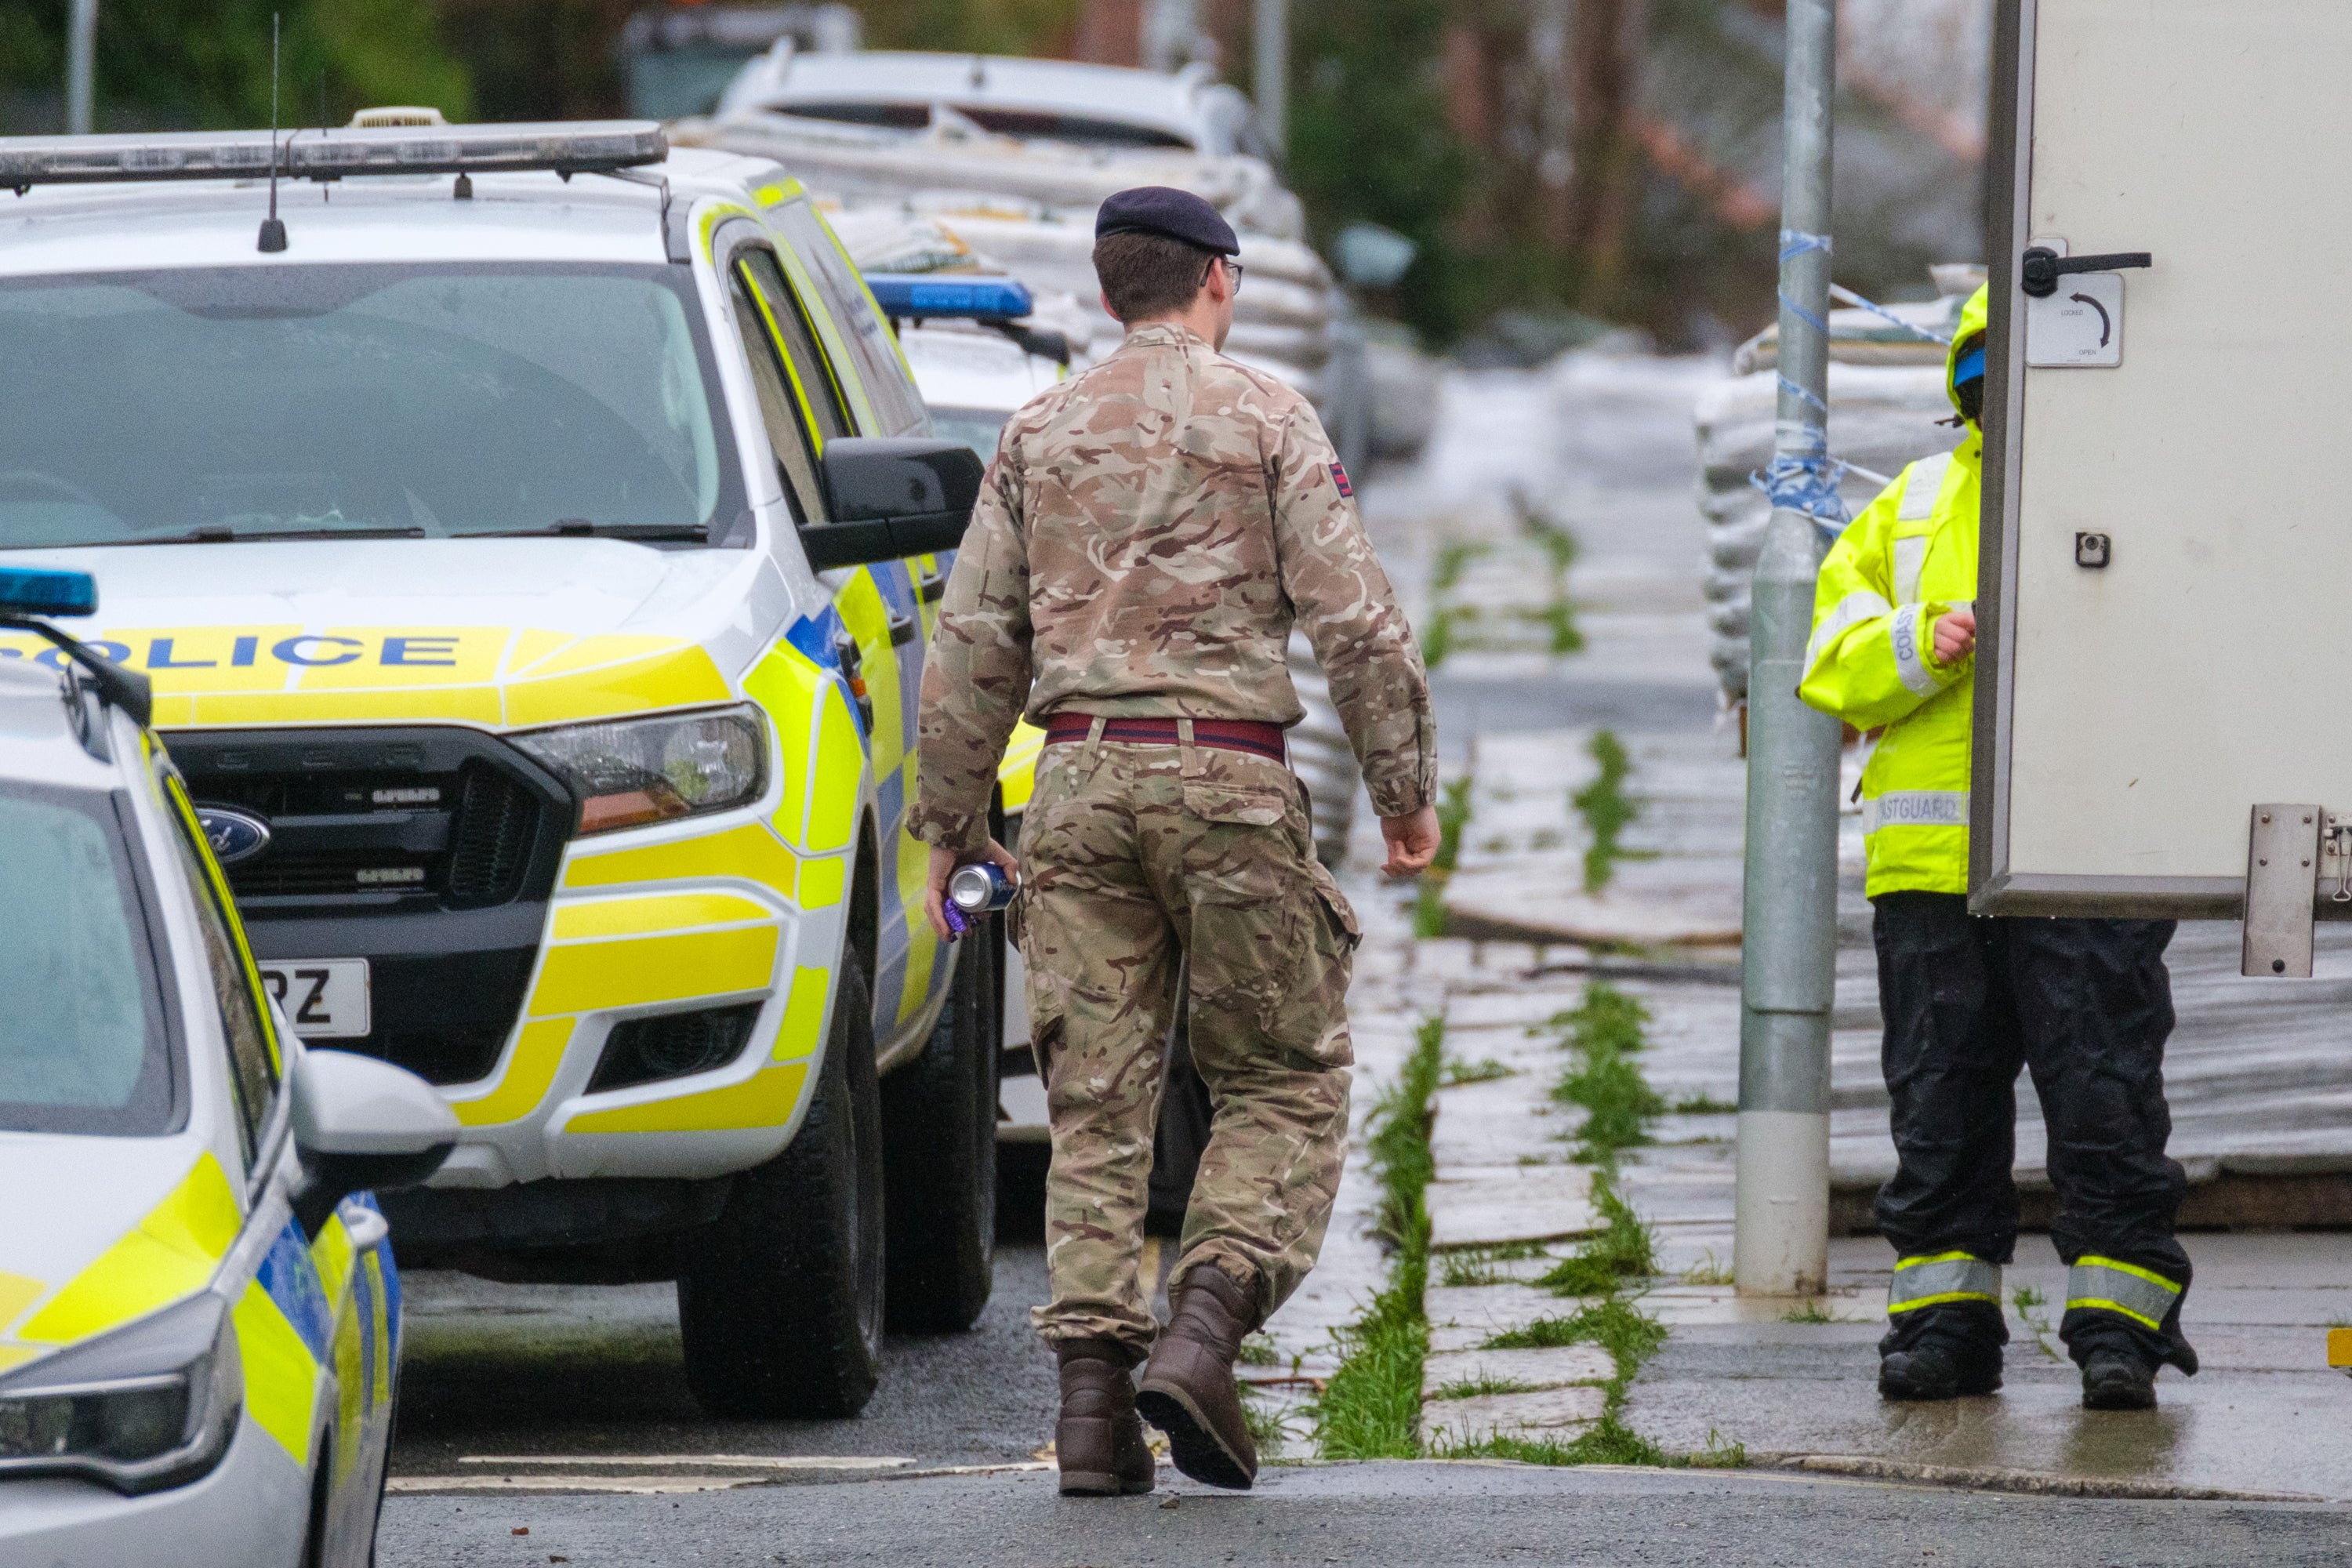 An ordnance disposal expert in Keyham, after homes in the area were evacuated